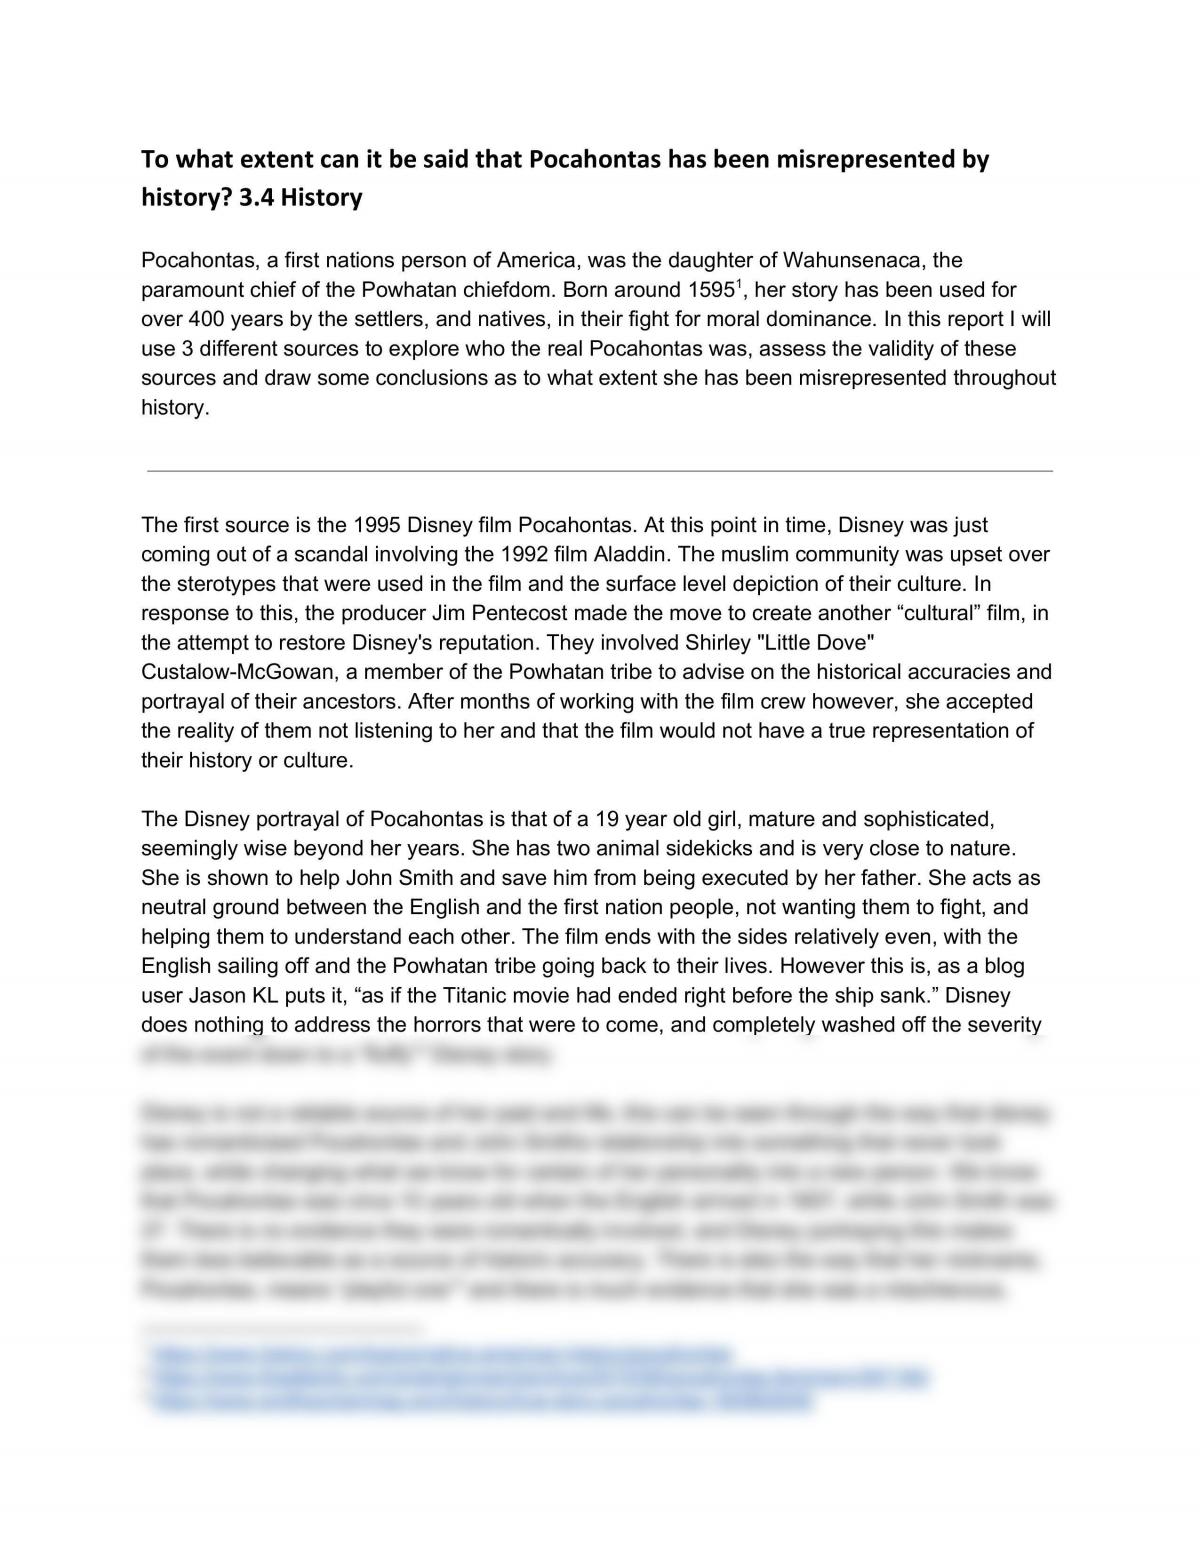 History 3.4 Excellence - Page 1